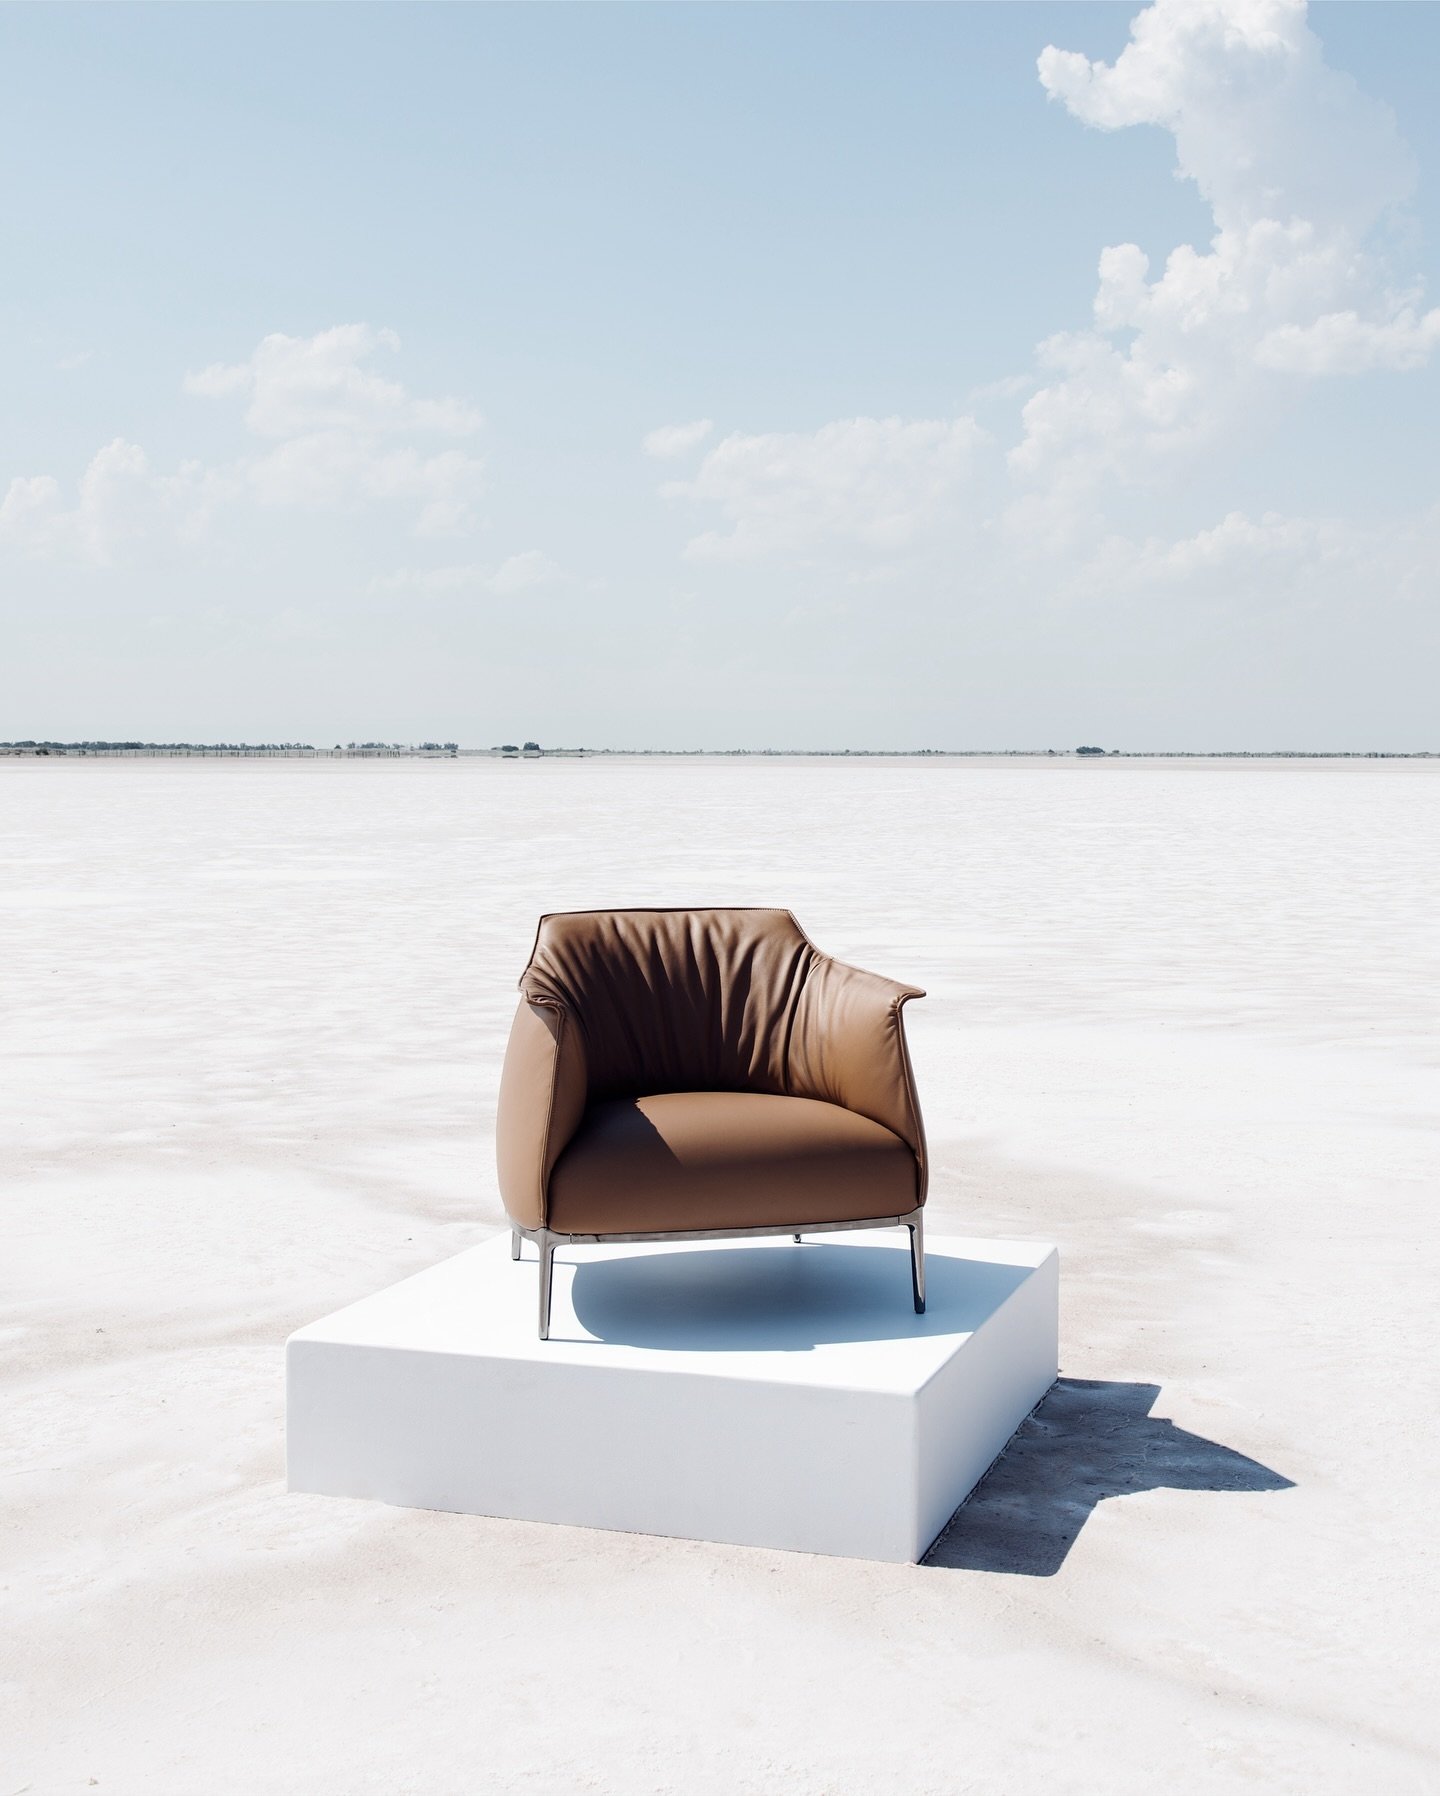 Time to relax. The Archibald armchair&rsquo;s comfortable and enveloping design is the perfect combination of substance and form. Designed by Jean-Marie Massaud for @poltronafrauofficial. 

For welcoming designs that shine in any setting, adventure w